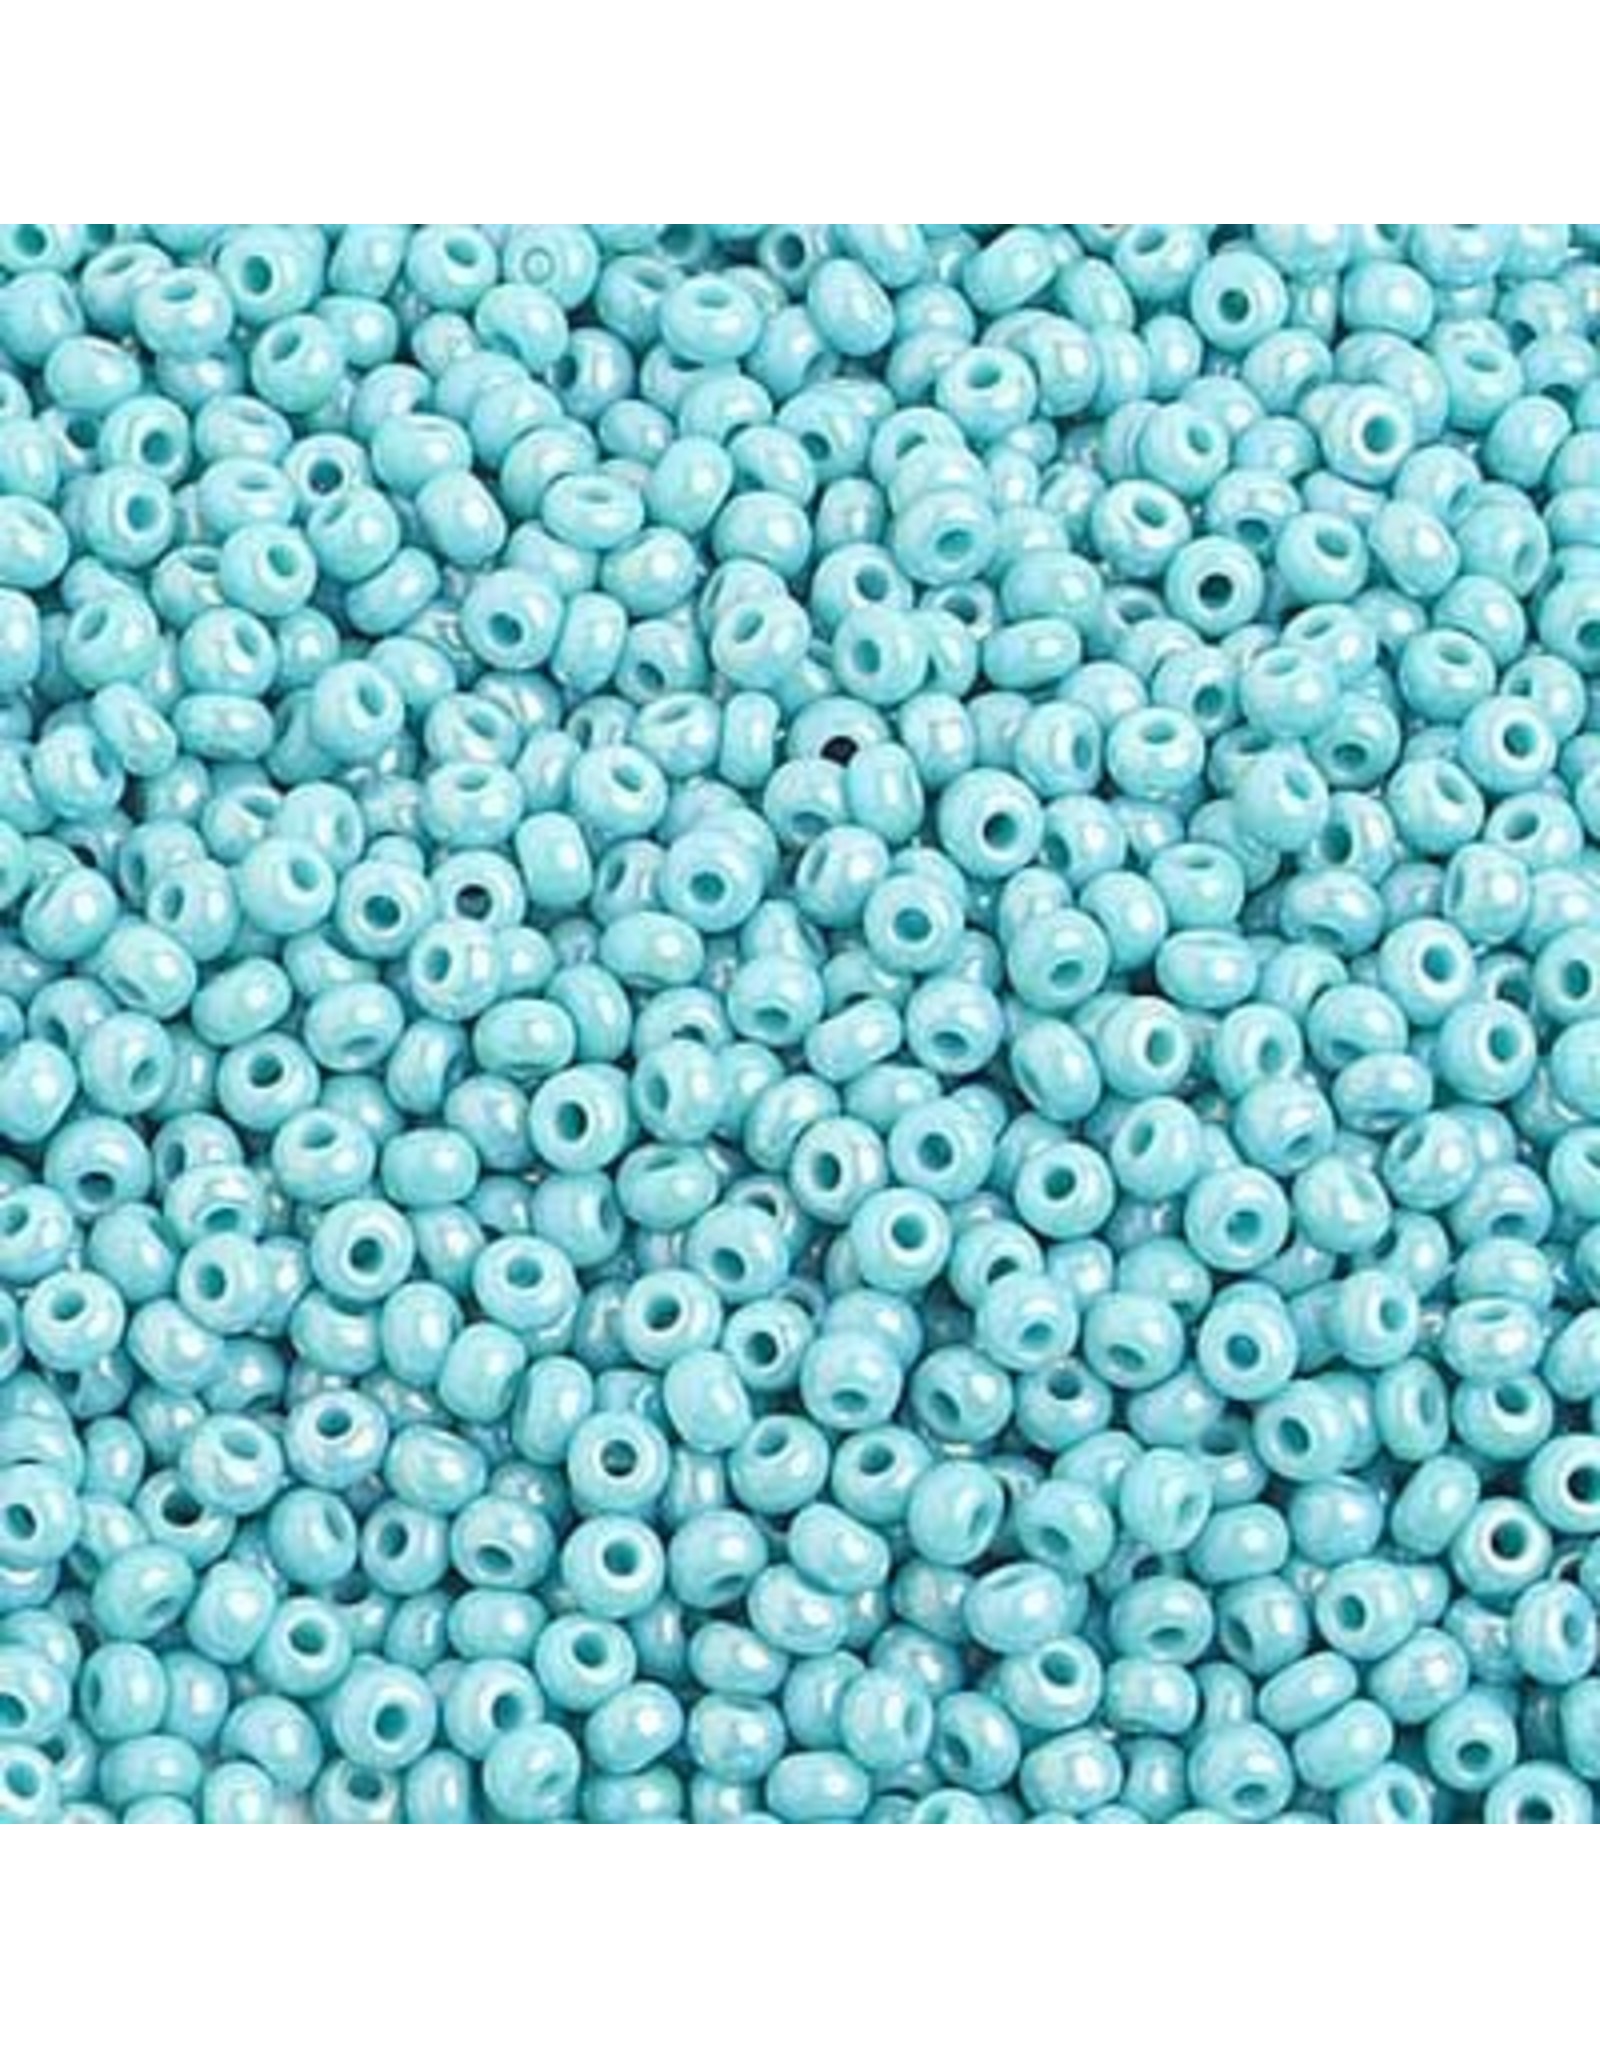 Czech 2314B 10  Seed 250g  Opaque Turquoise  Blue AB